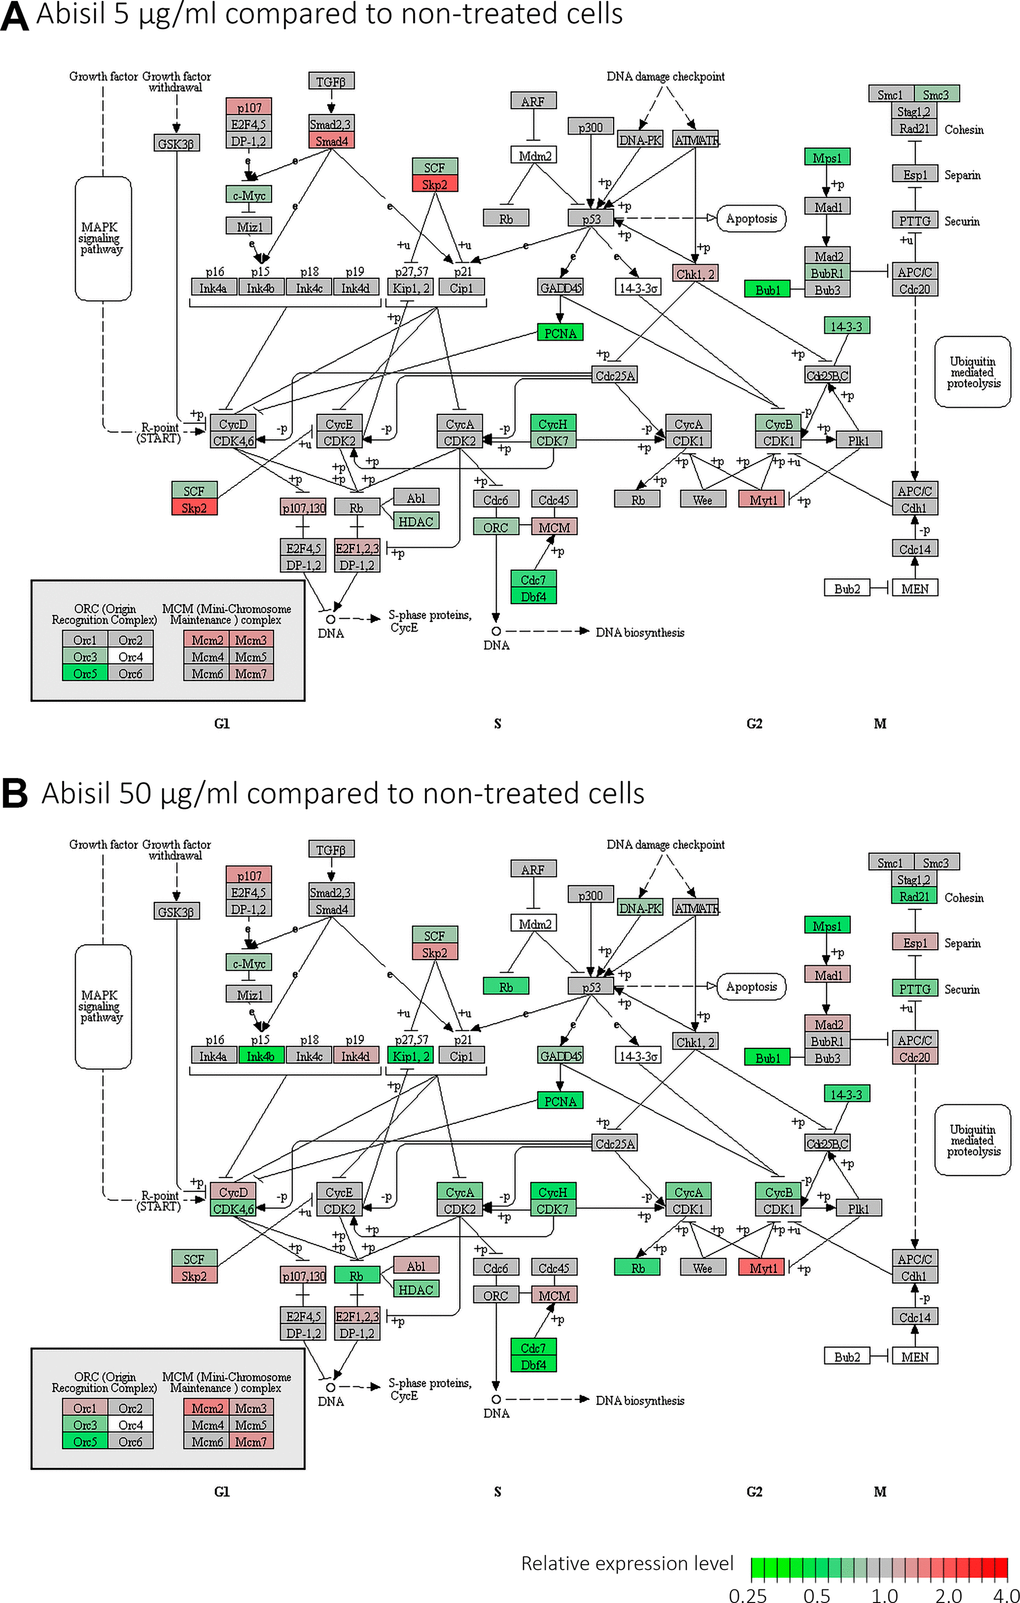 Diagram illustrating expression changes of genes participating cell cycle signaling pathway (KEGG) after Abisil treatment (MRC5-SV40 cell line): 5 μg/ml (A) and 50 μg/ml (B). Green – downregulation, red – upregulation.